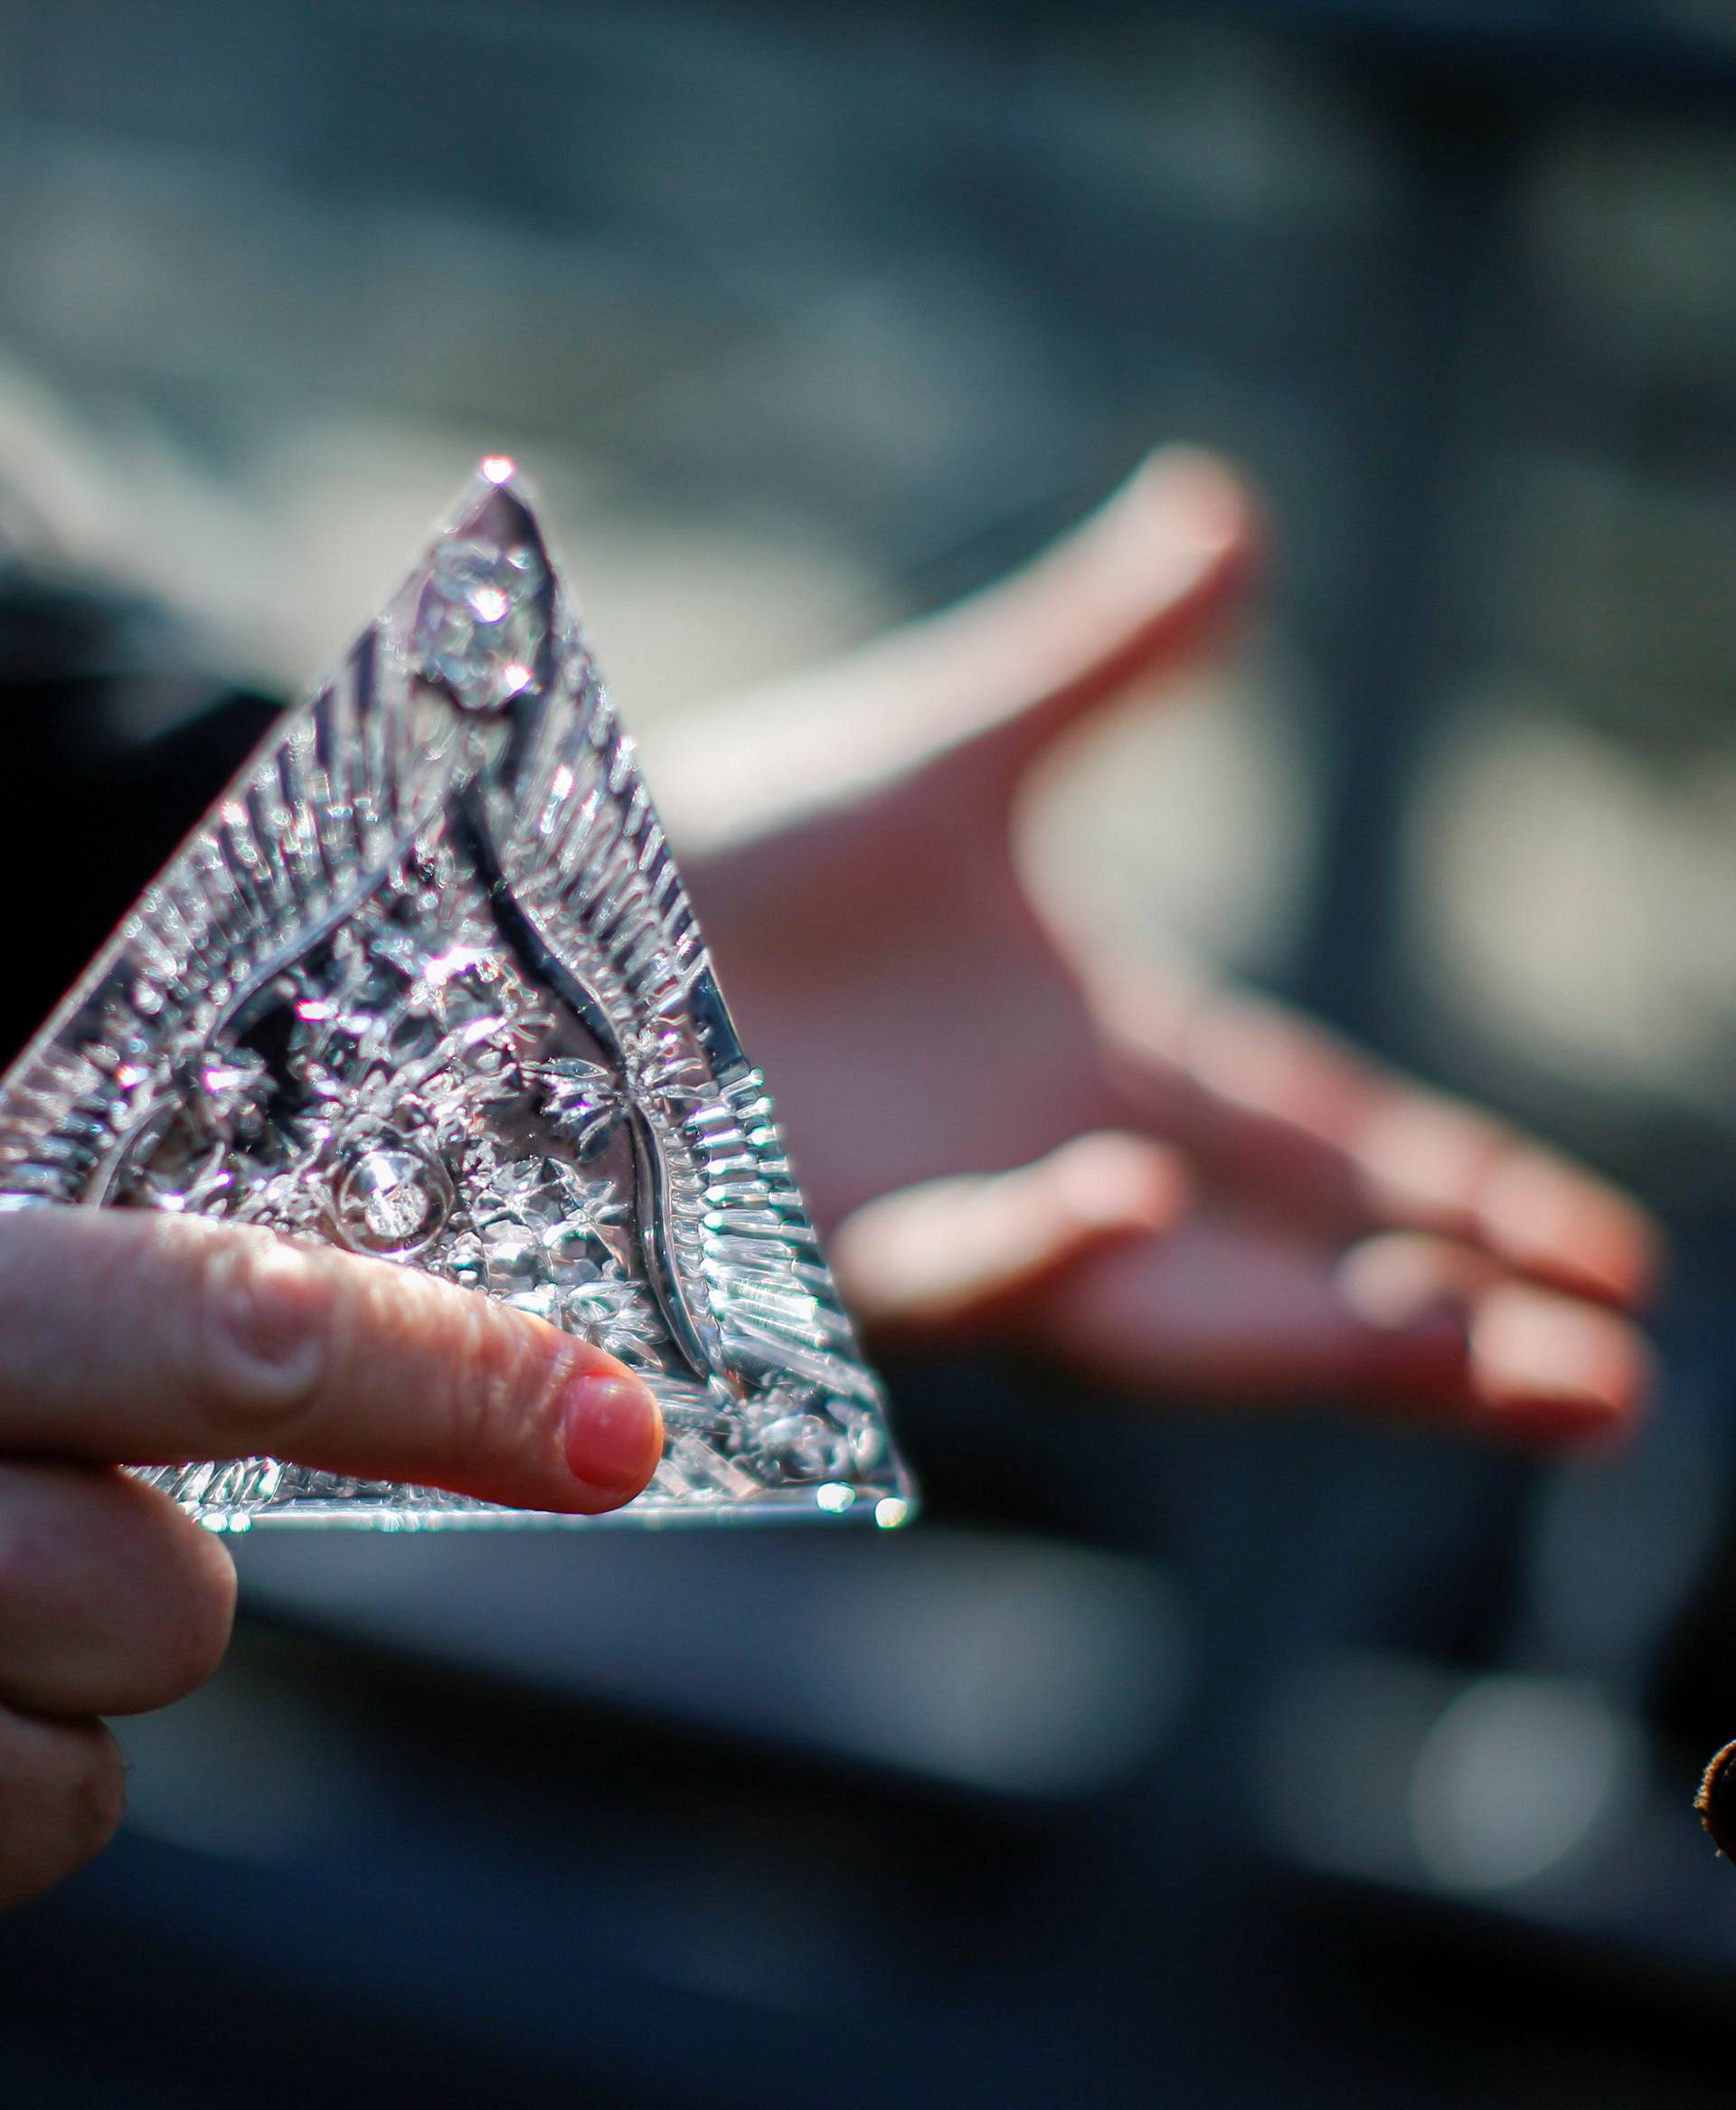 Tom Brennan, Master Artisan of Waterford Crystal, holds a Waterford Crystal triangle from the Times Square New Year's Eve Ball on the roof of One Times Square in Manhattan, New York